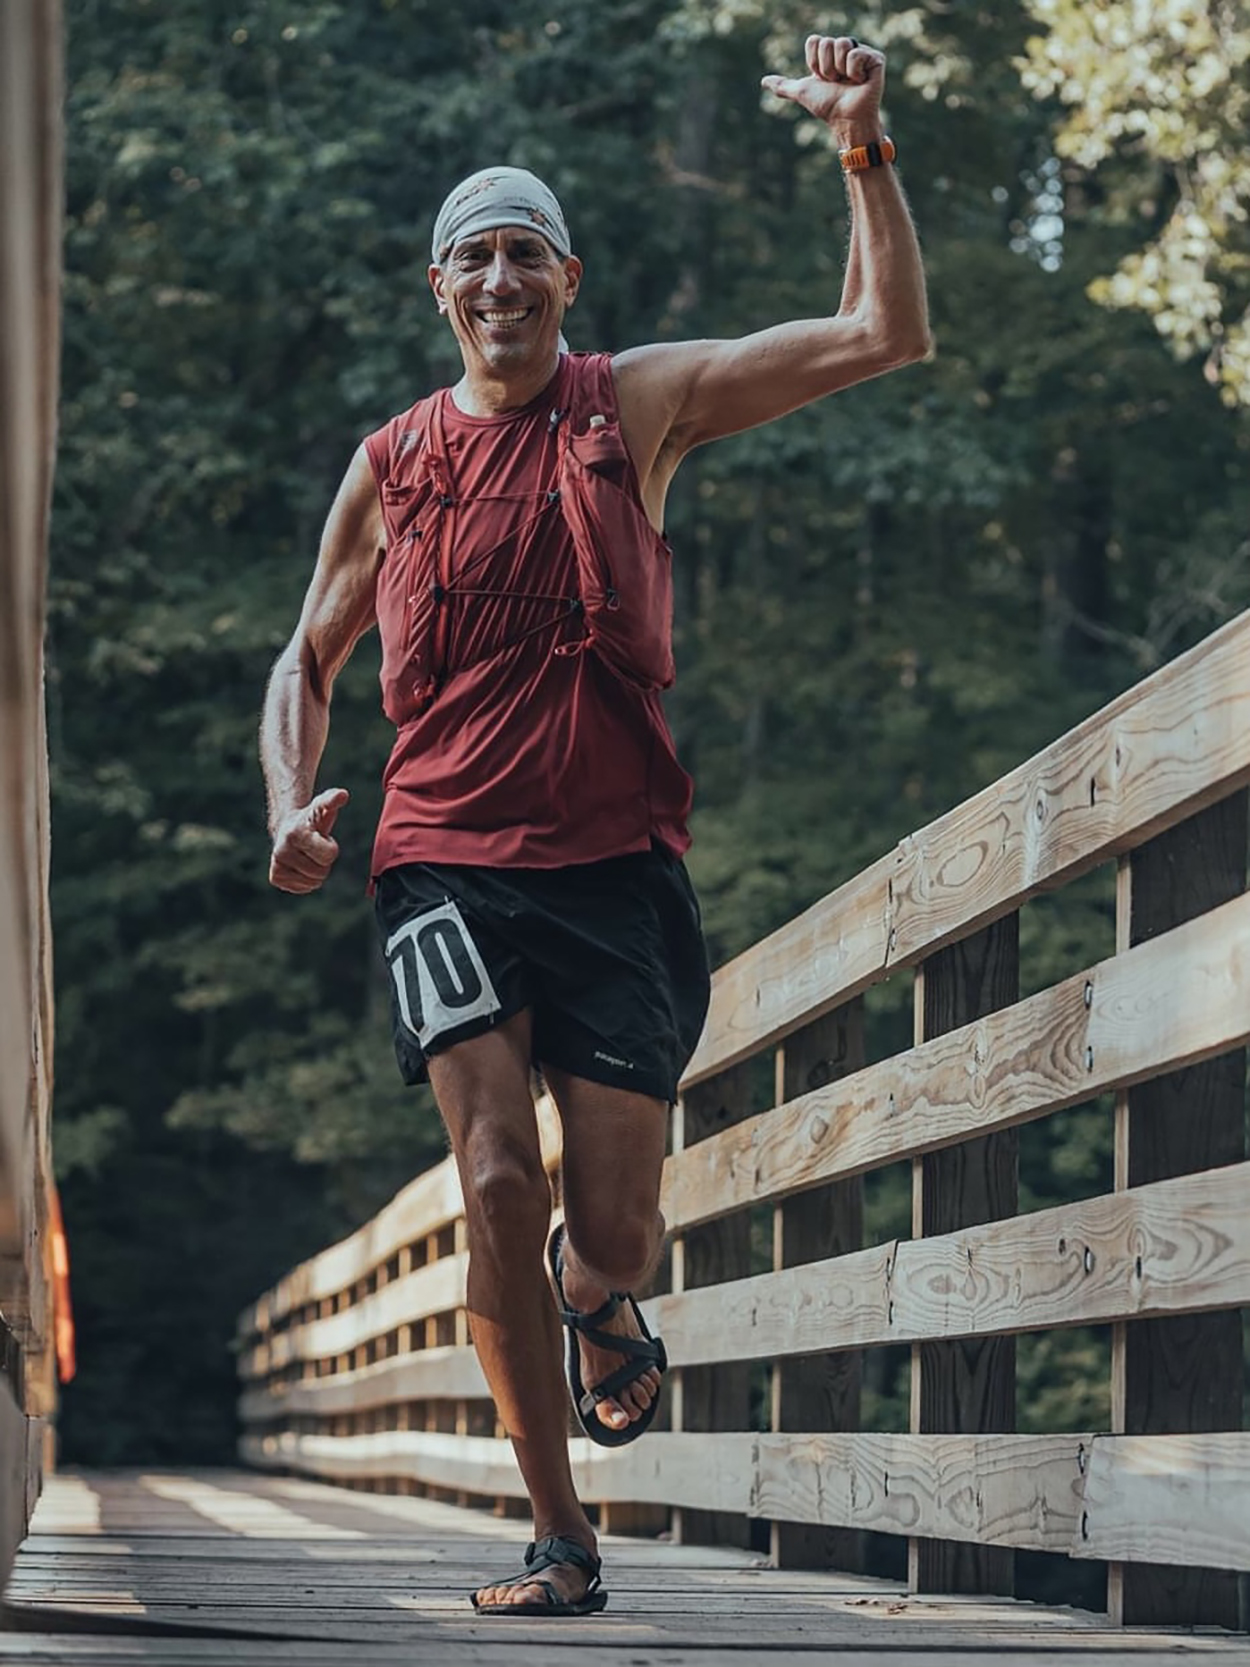 Crail was a runner when he was younger, but gave up after experiencing pain in his feet and ankles. He renewed his passion for running by changing his footwear and body type. He is shown wearing his Xero Shoes sandals at his May 2022 Tye Kye 50 K in Yellow Springs. He was 59 years old.